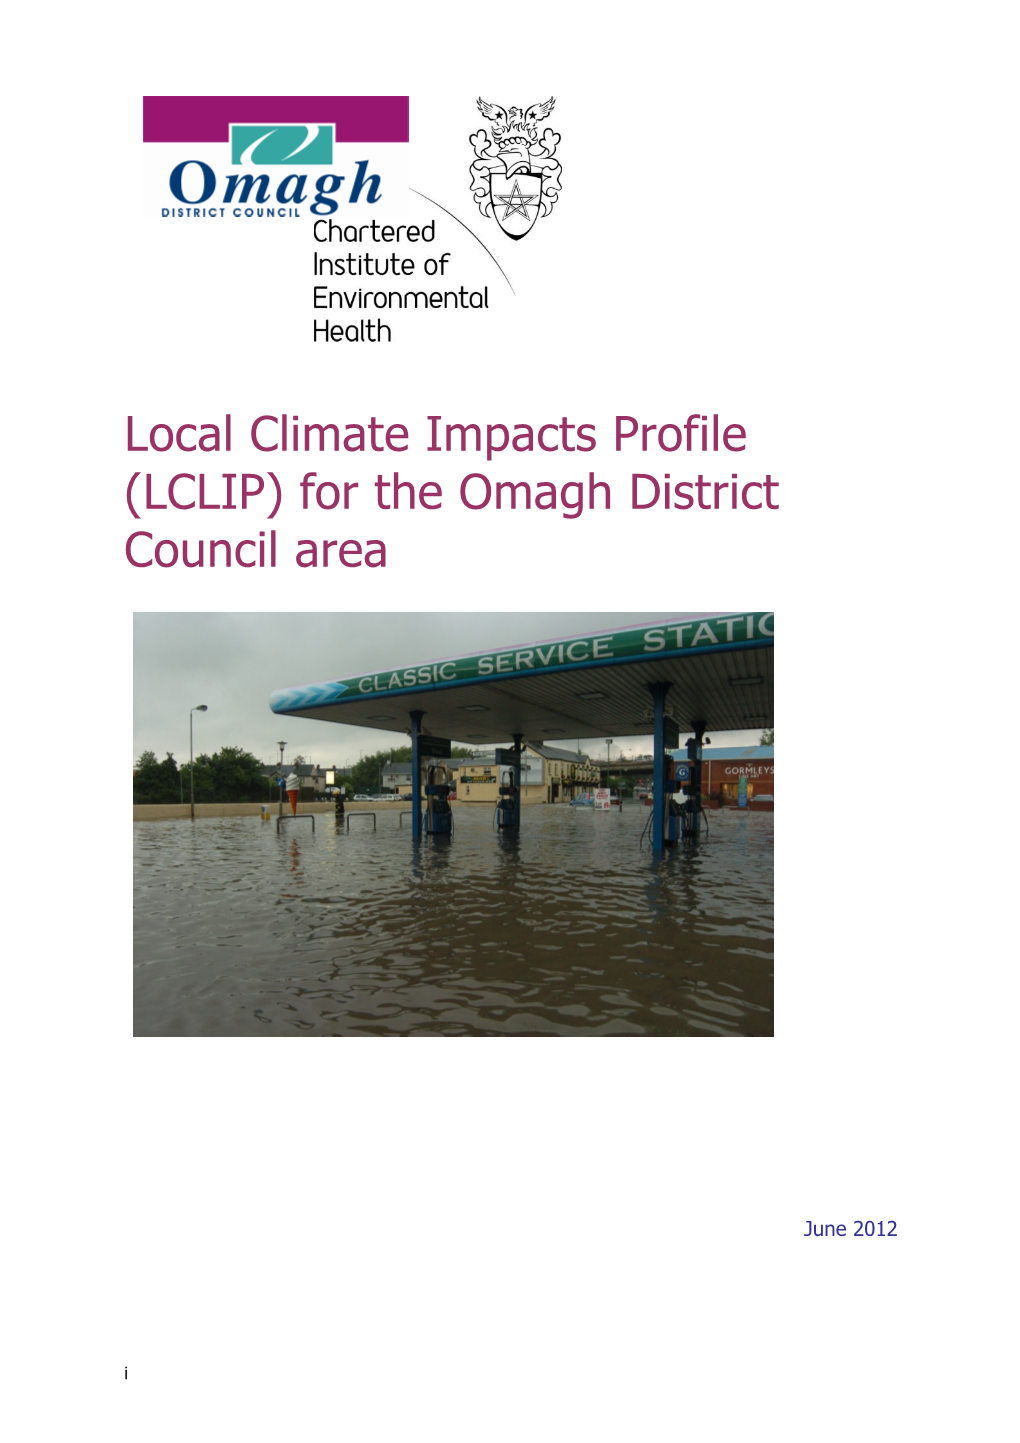 Local Climate Impacts Profile (LCIP) for the Omagh District Council Area